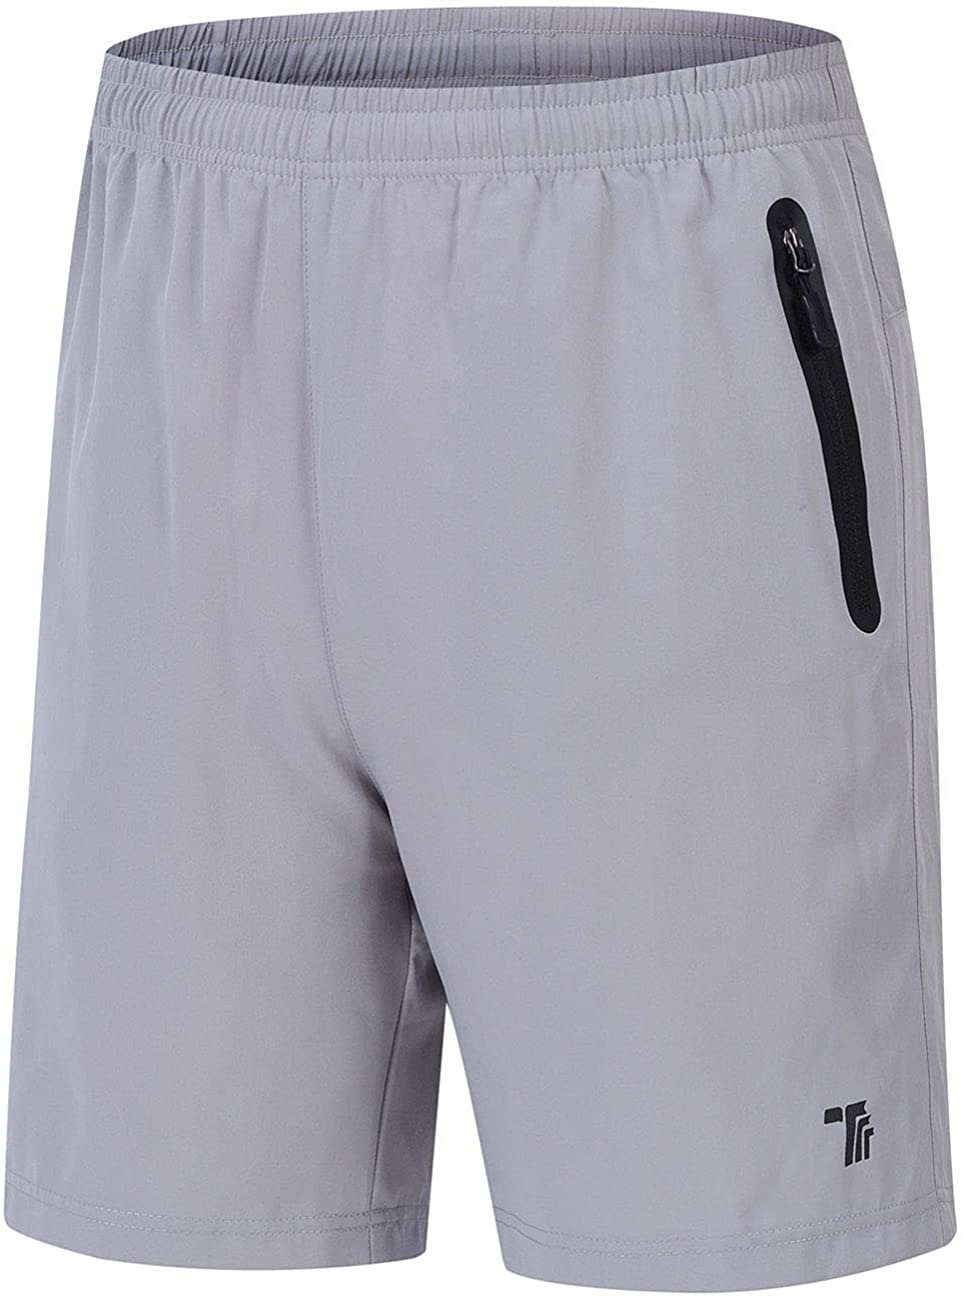 TBMPOY Men's 7'' Athletic Running Shorts Quick Dry Shorts with Zipper Pockets 